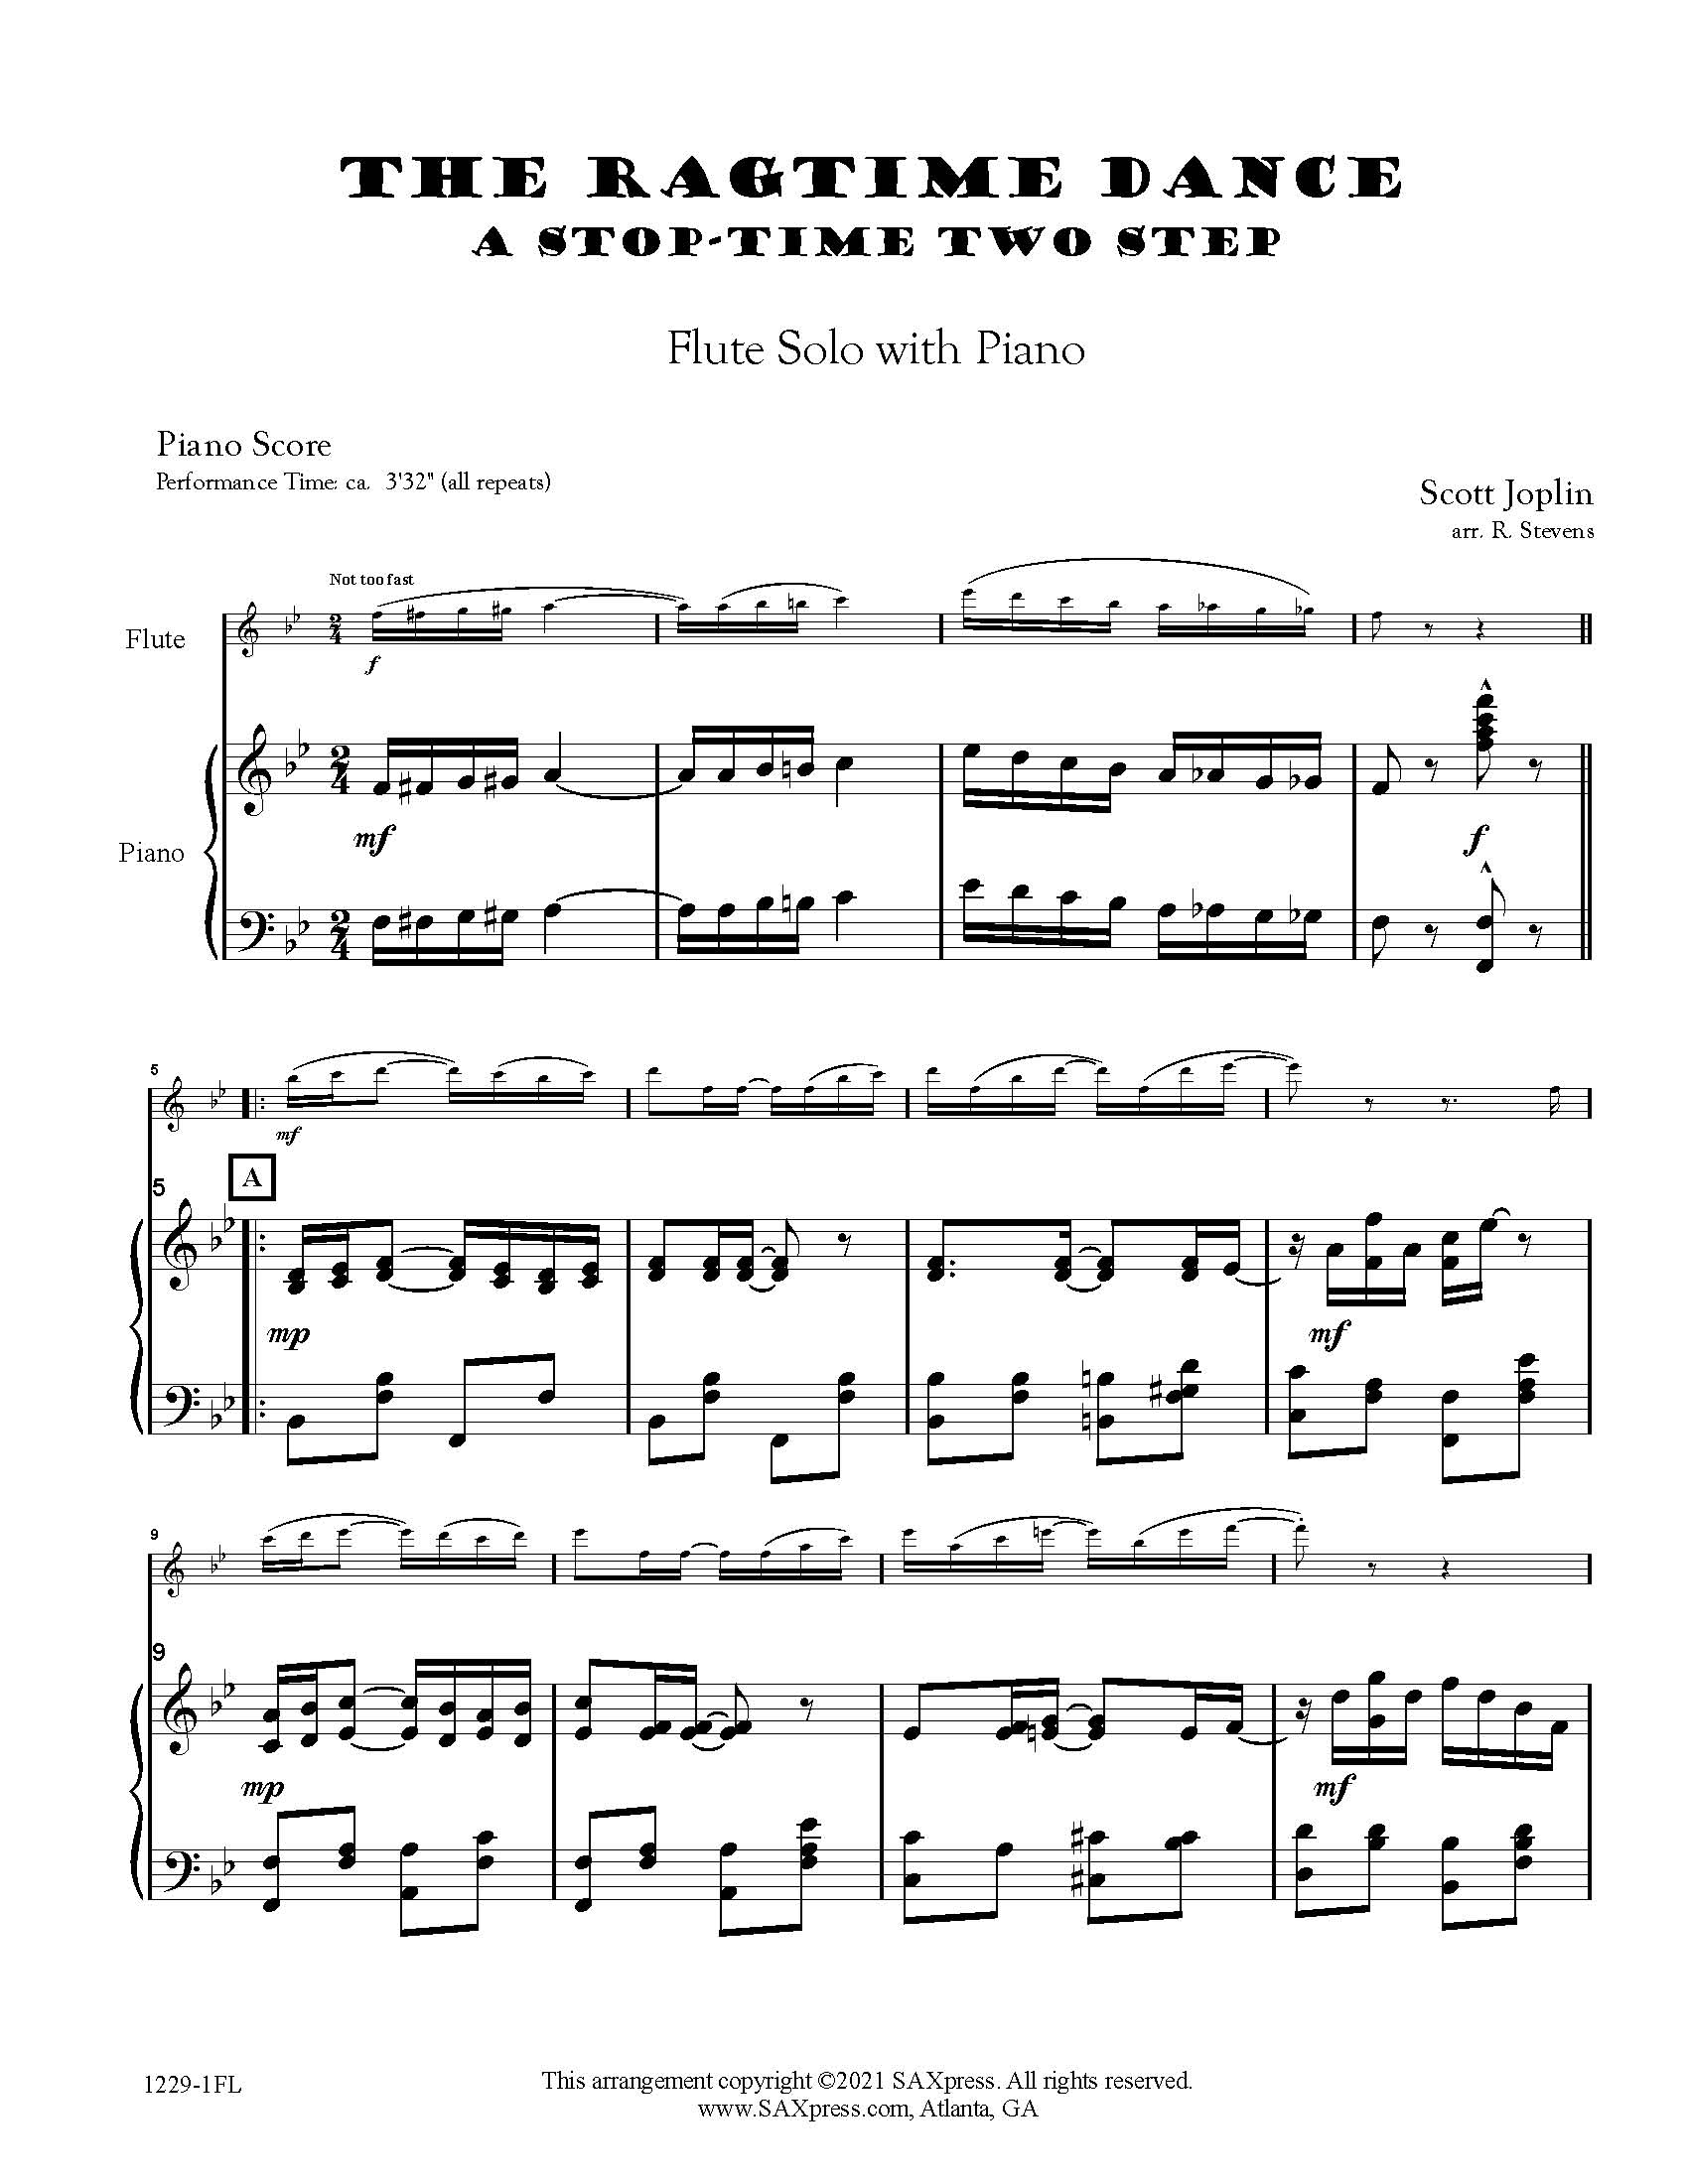 https://saxpress.com/wp-content/uploads/2021/02/The-Ragtime-Dance-Flute-SOLO-with-piano-00-Piano-Score_Page_03.jpg